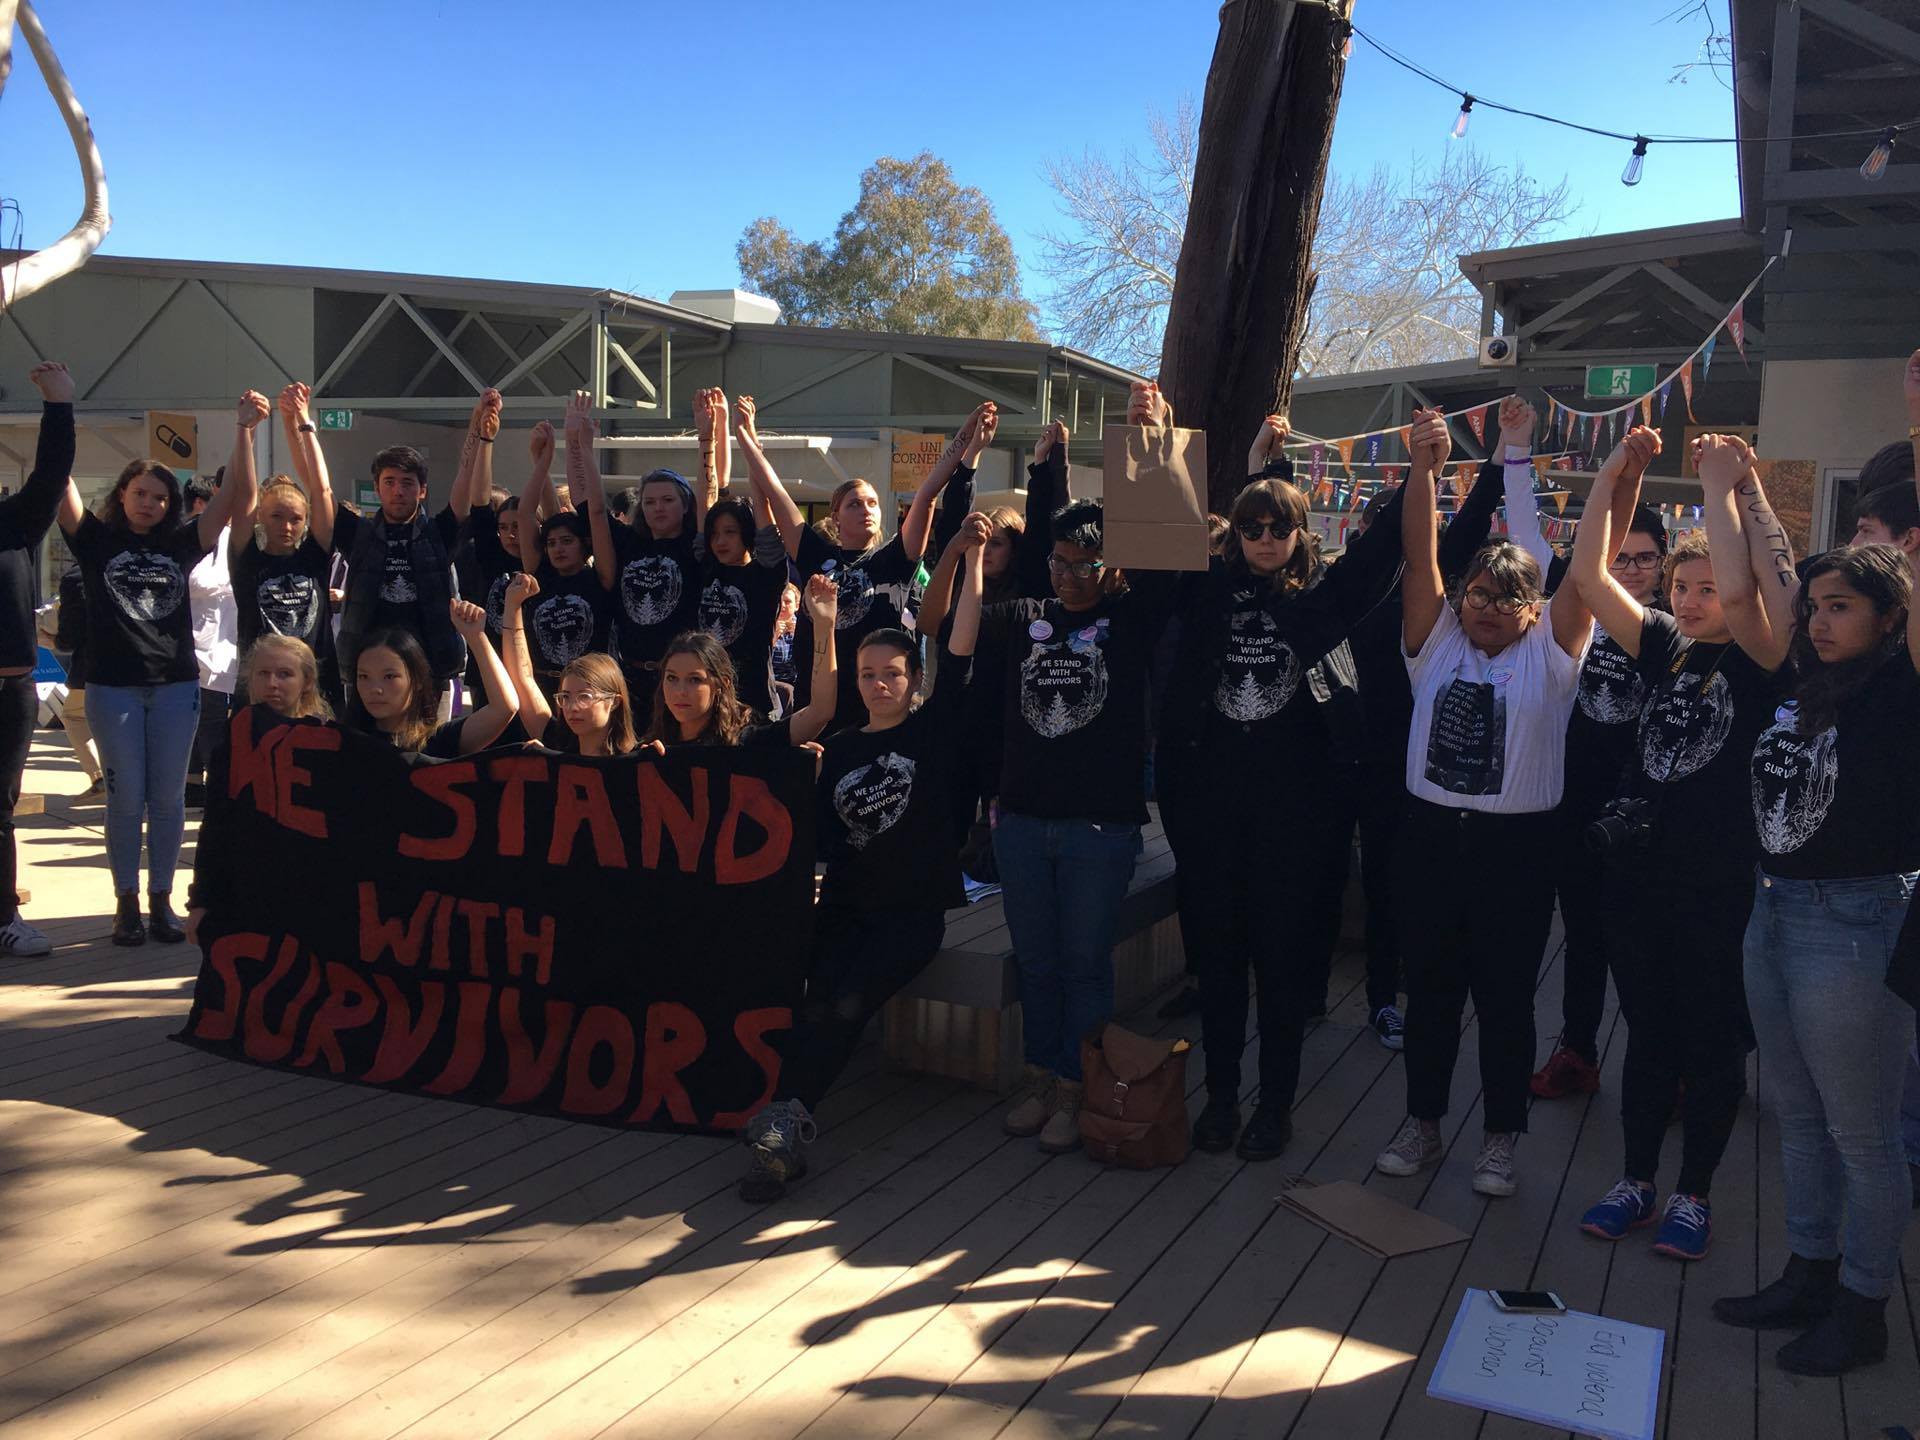 Students at the pop-up protesting, arms raised